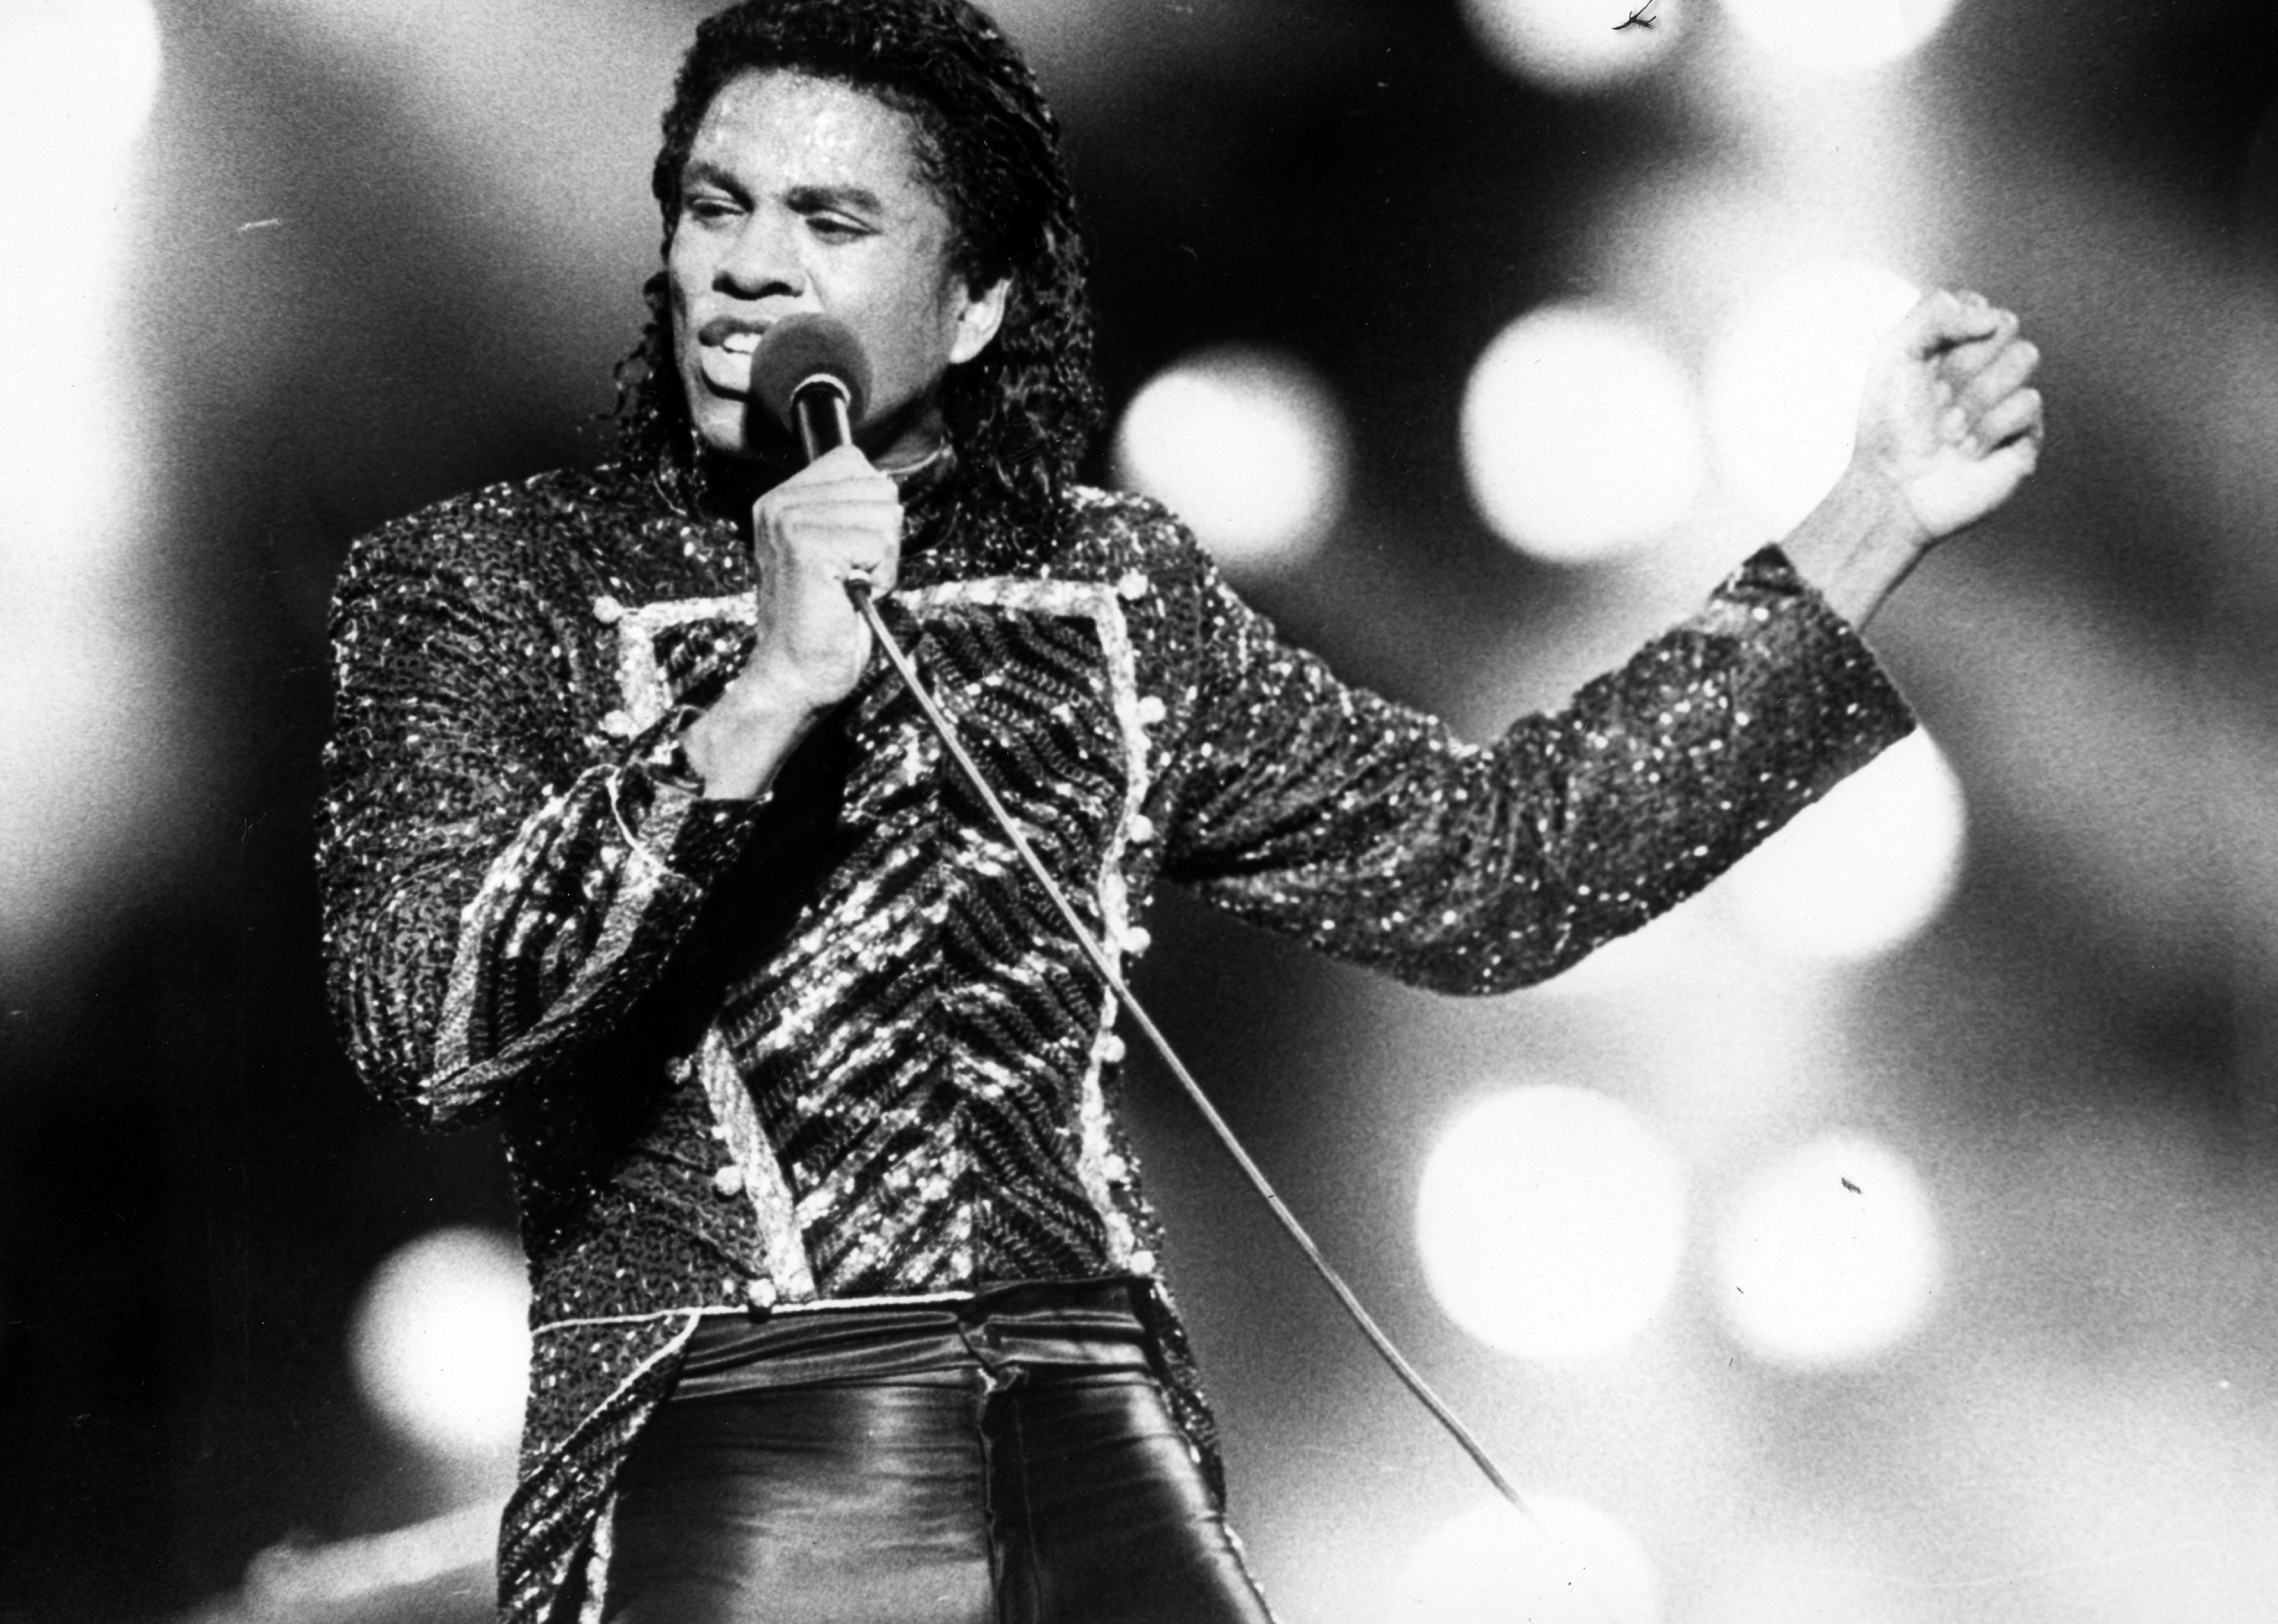 Jermaine Jackson performs live on stage at a concert and holds a microphone.